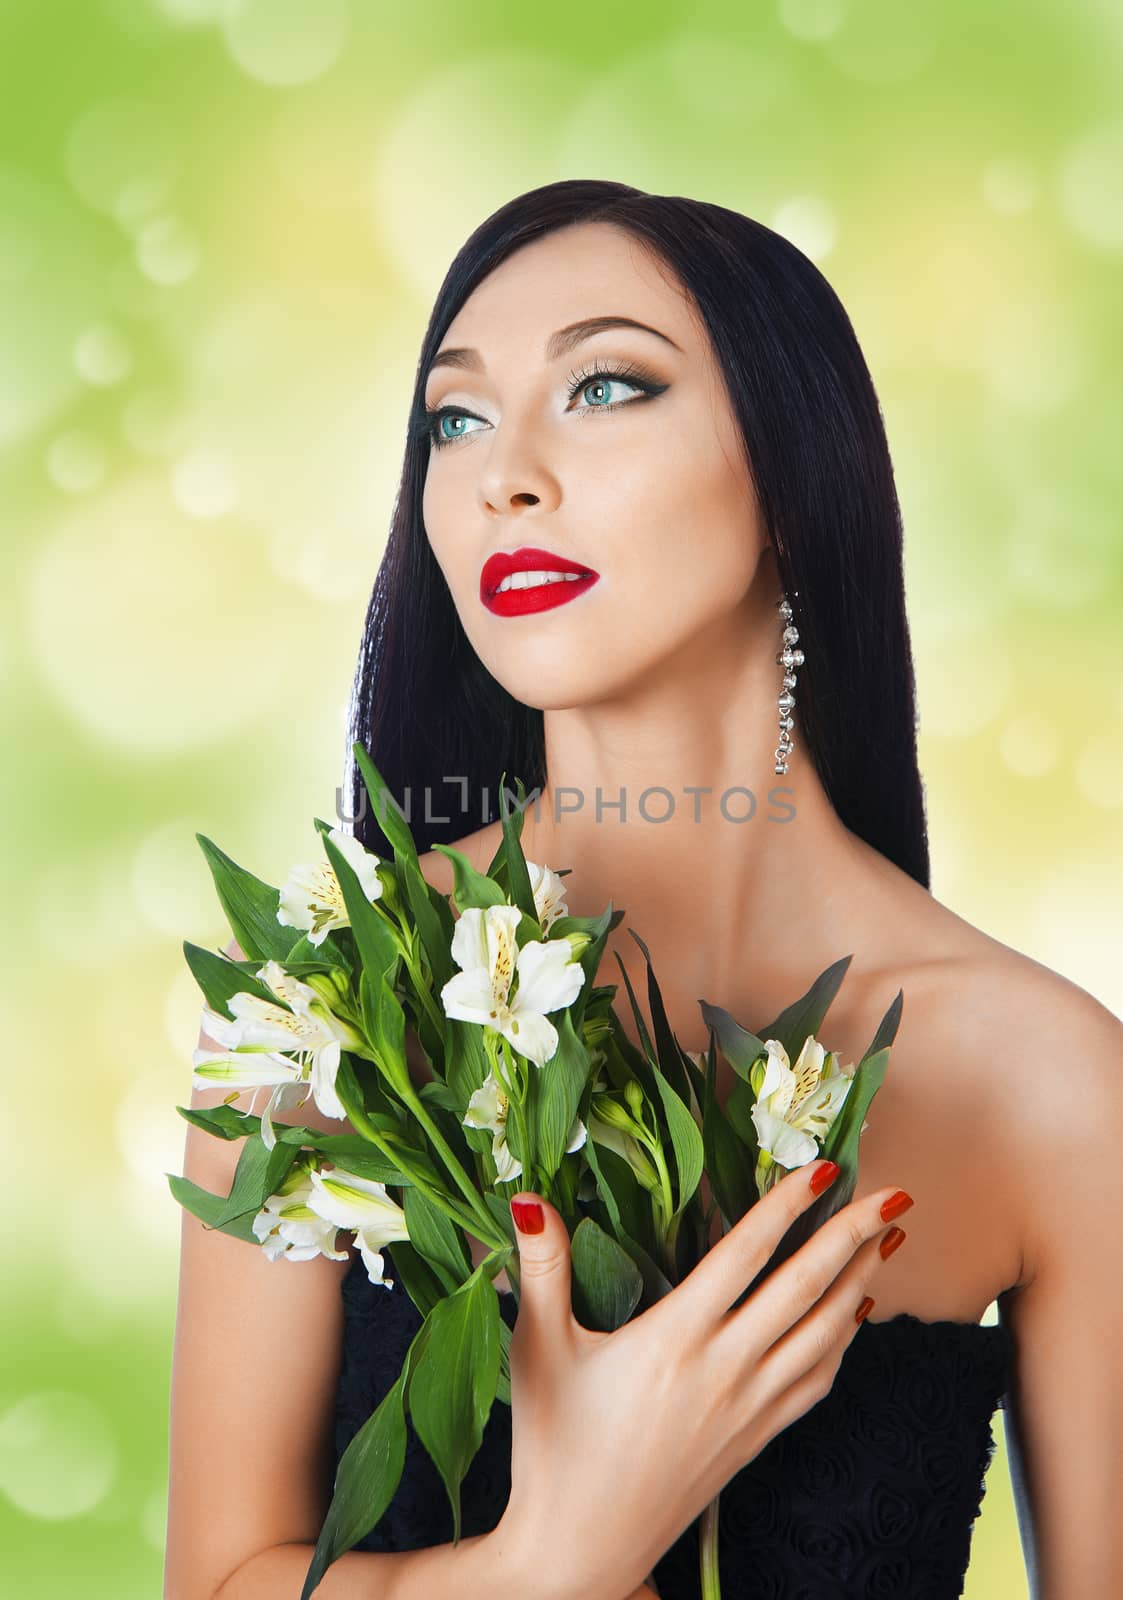 	

 mermaid with green hair with flowers Alstroemeria